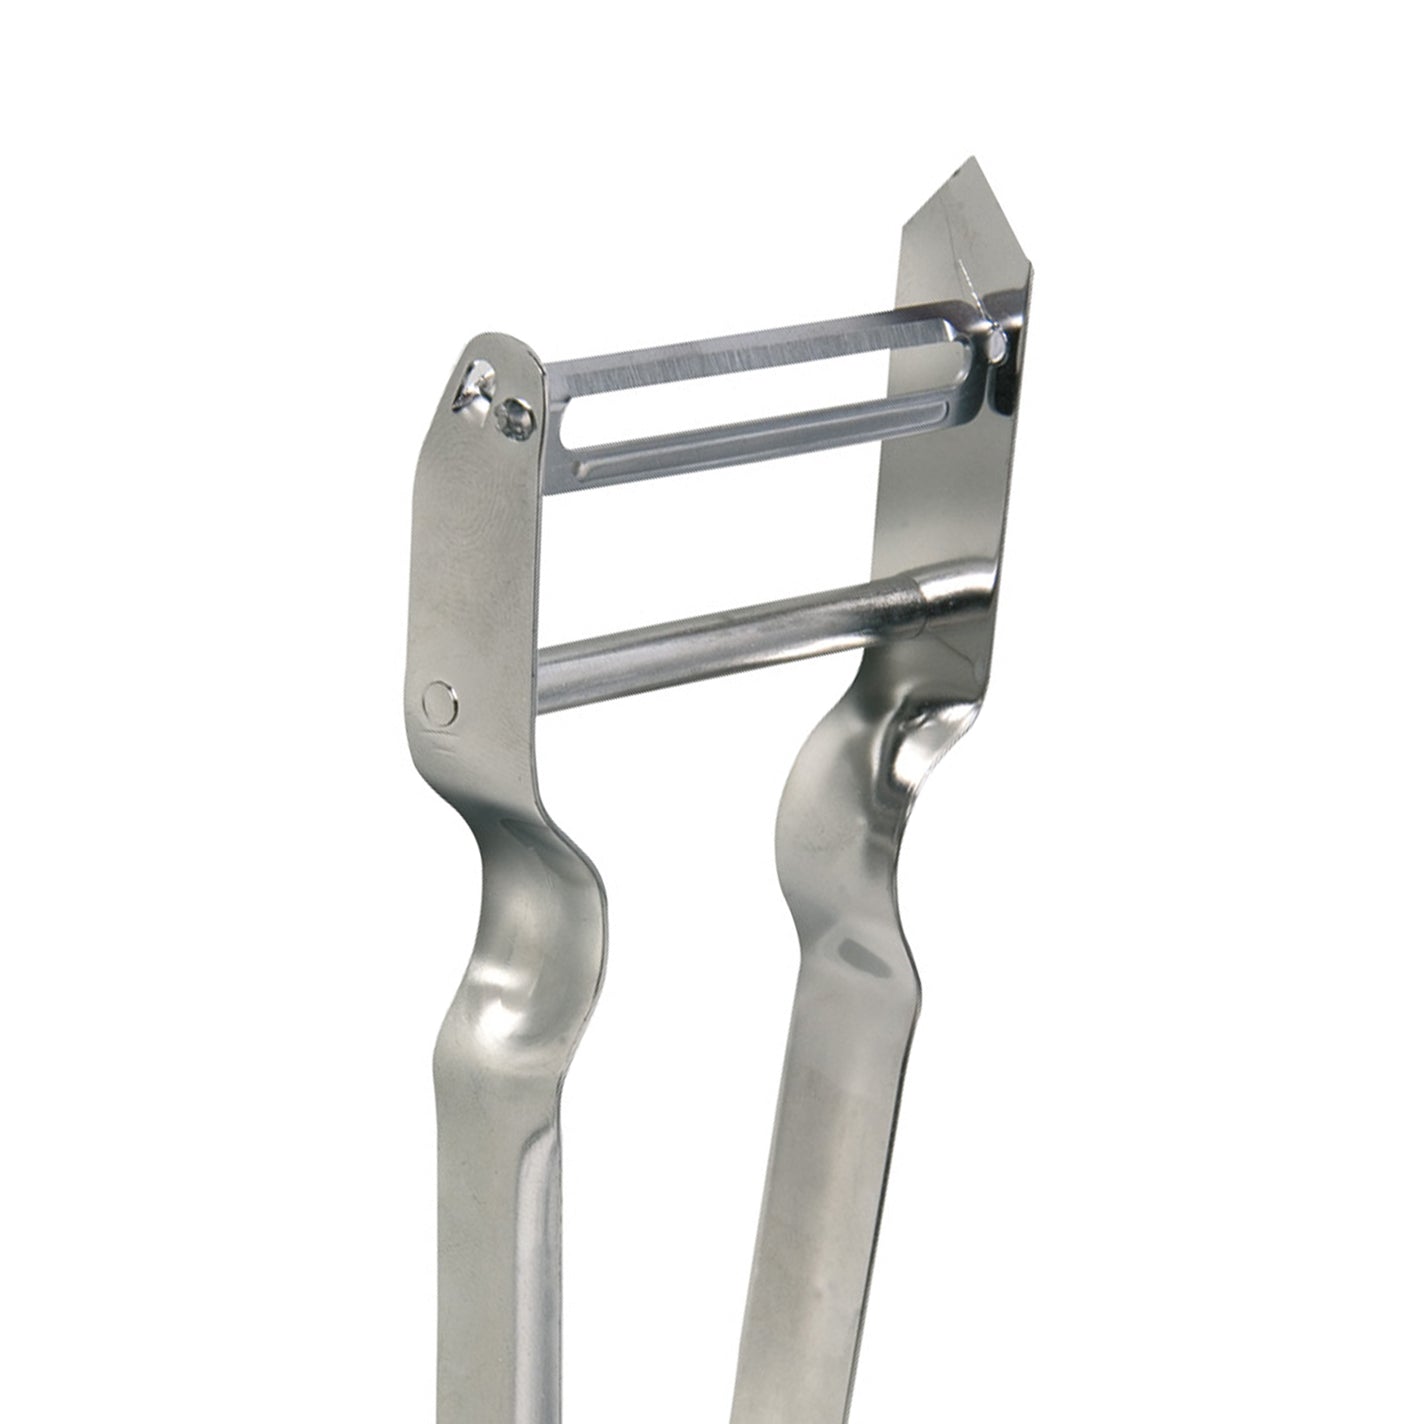  Stainless Steel Vegetable Peeler - Can Be Used For